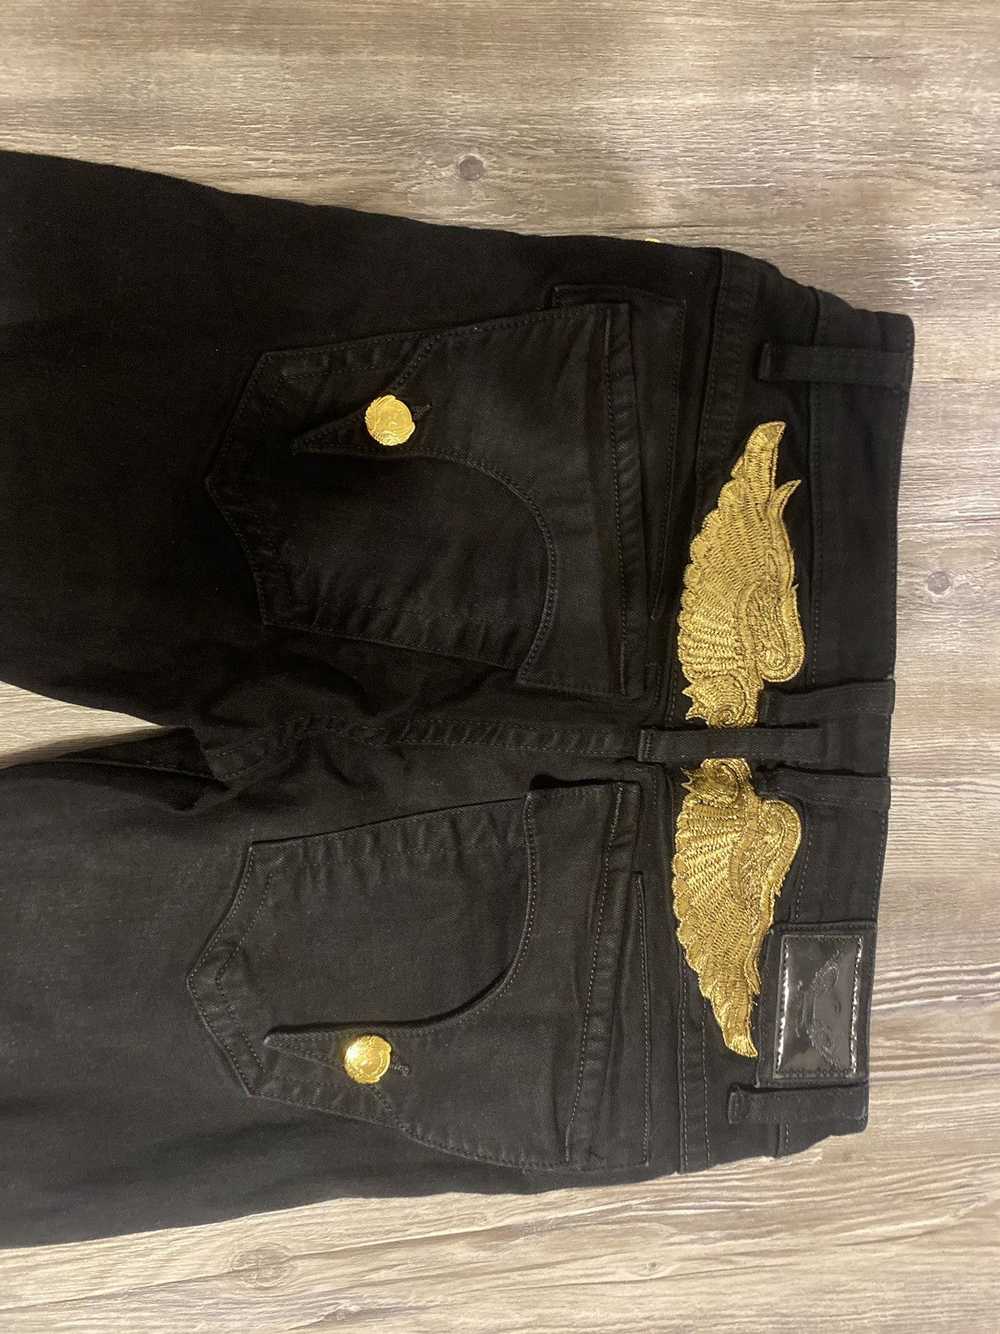 Robins Jeans Robins jeans black/gold - image 3